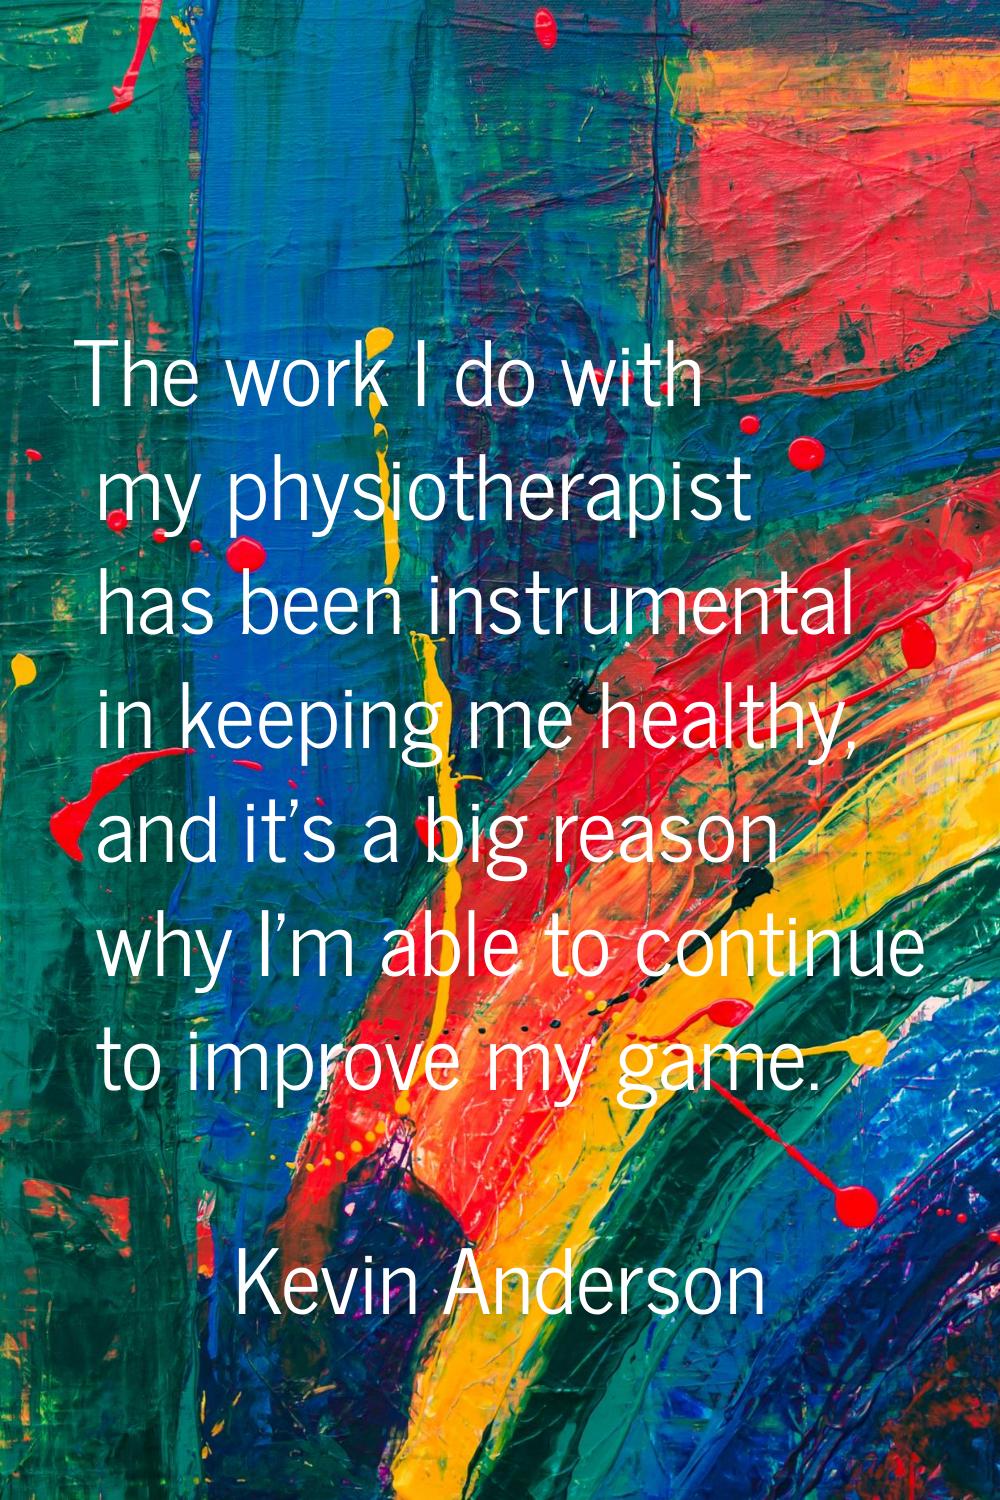 The work I do with my physiotherapist has been instrumental in keeping me healthy, and it's a big r